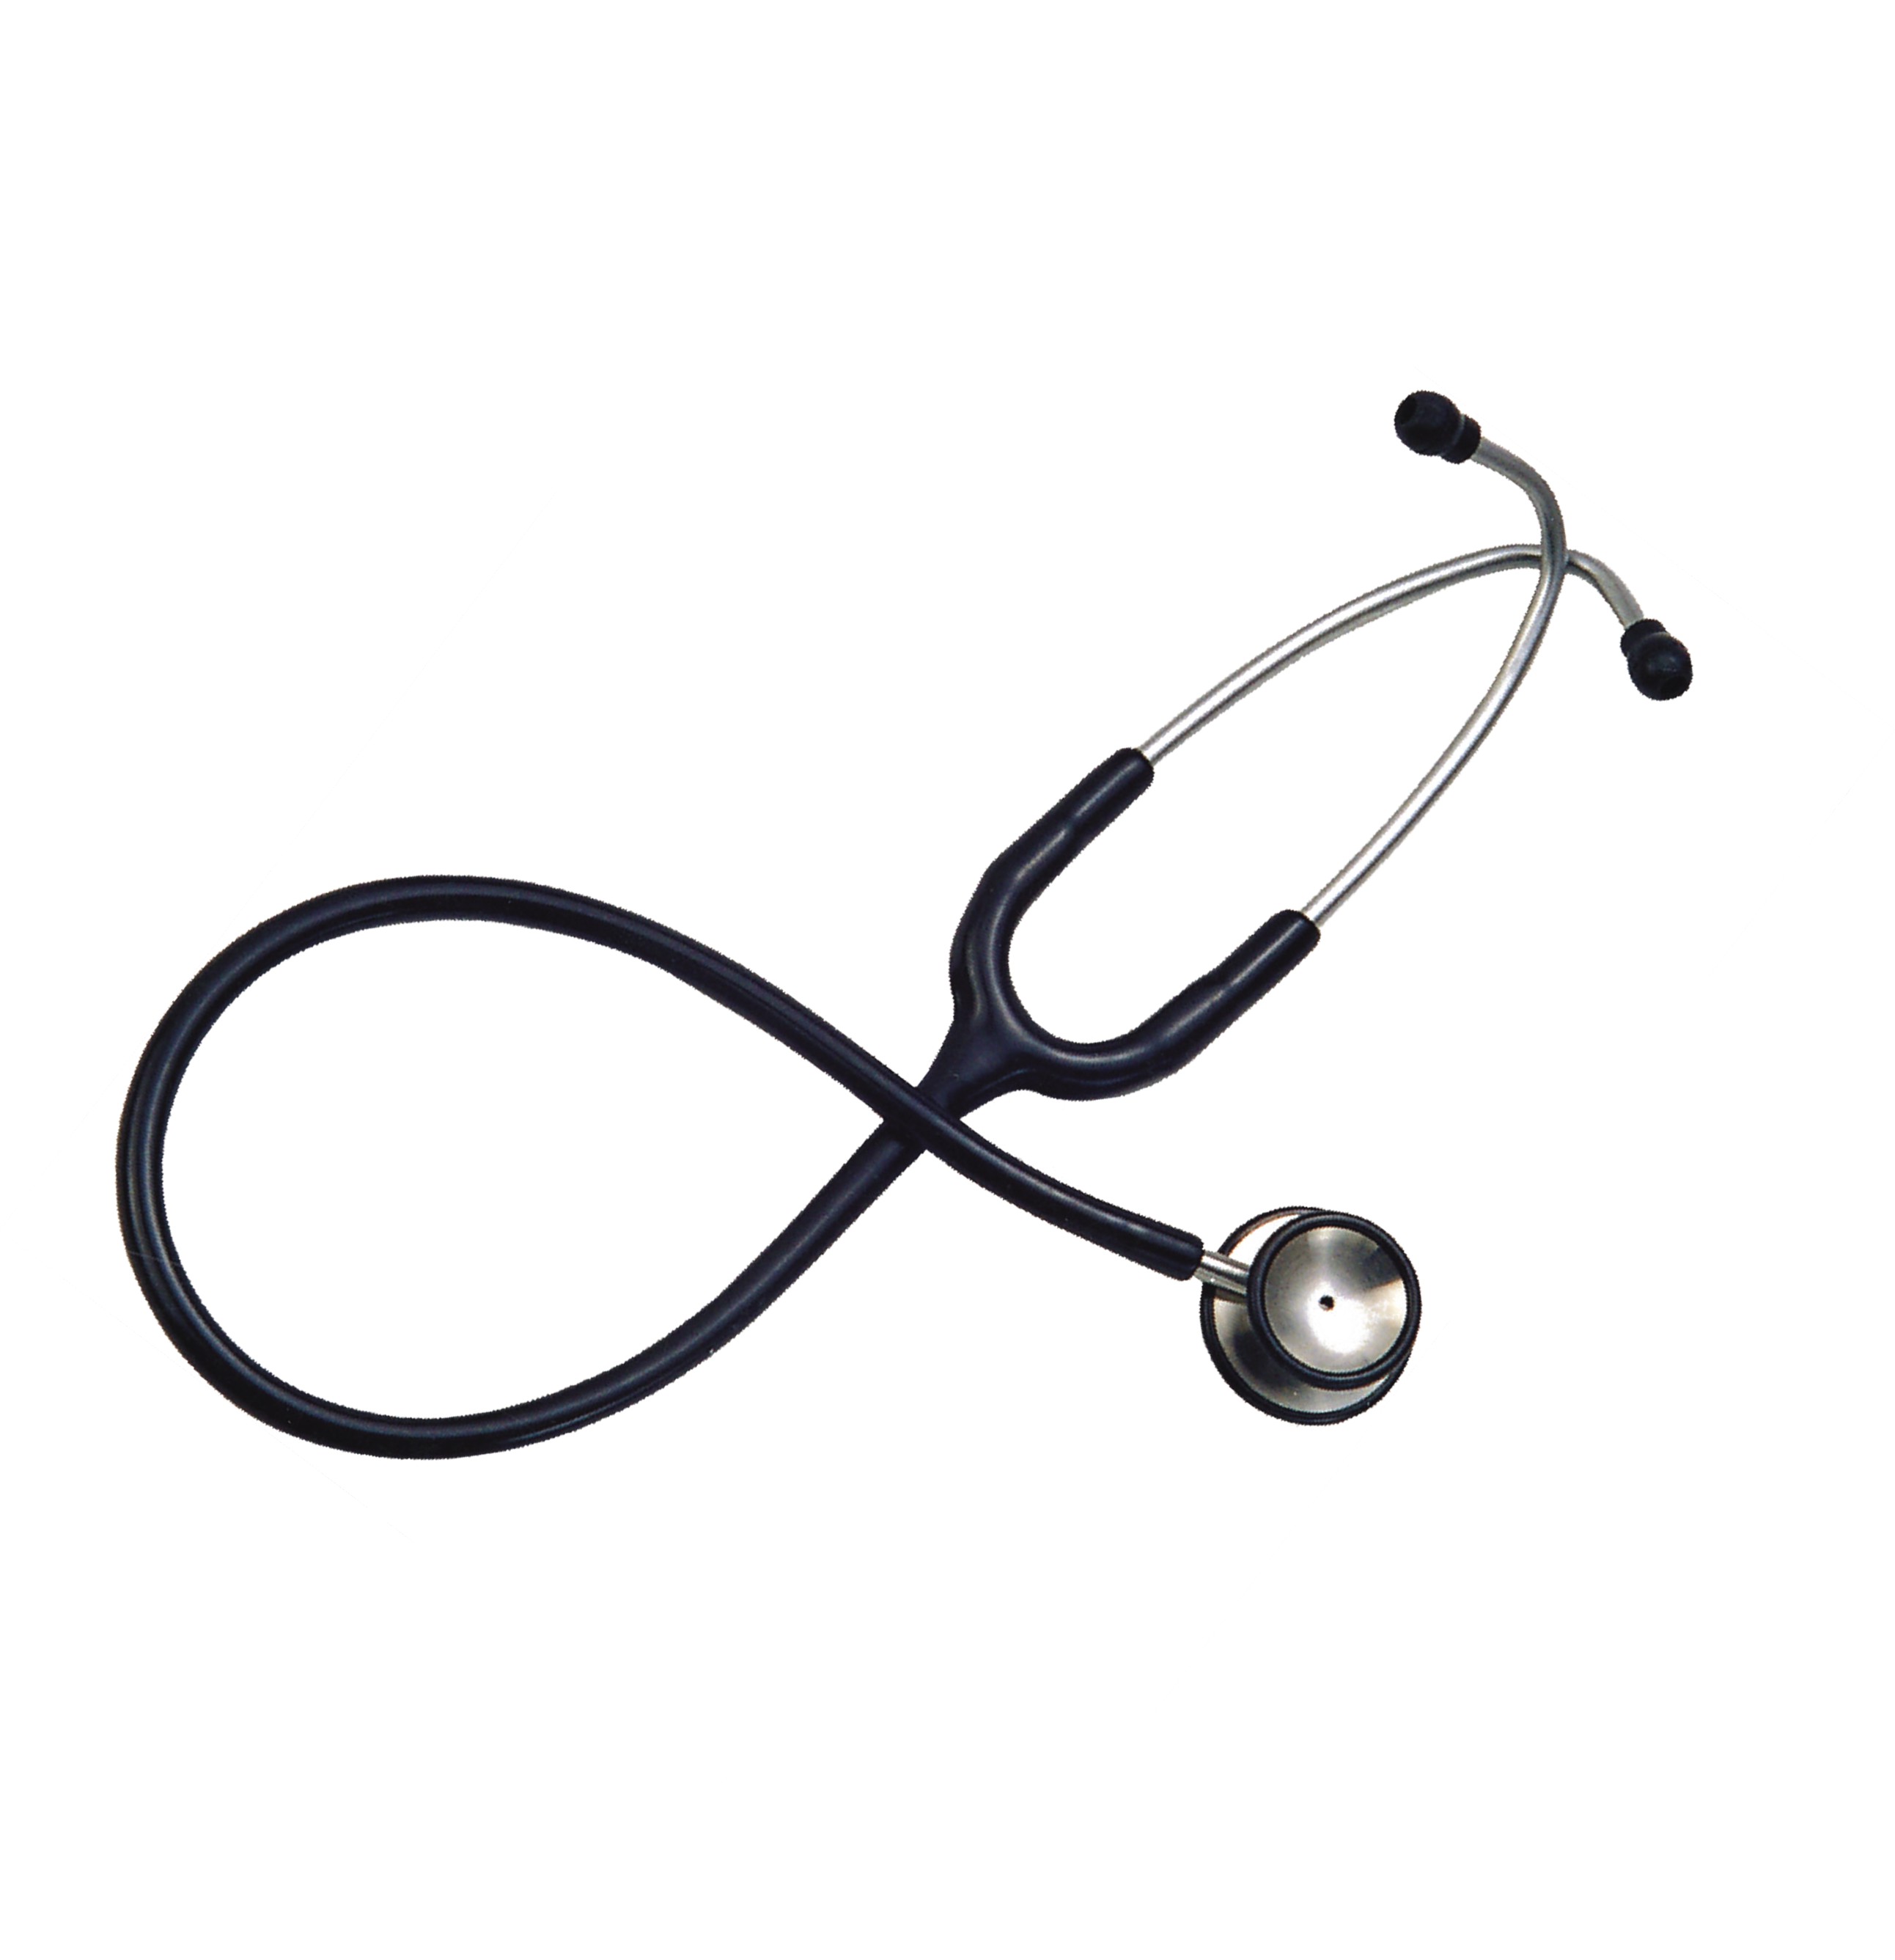 Simple stethoscope clipart.